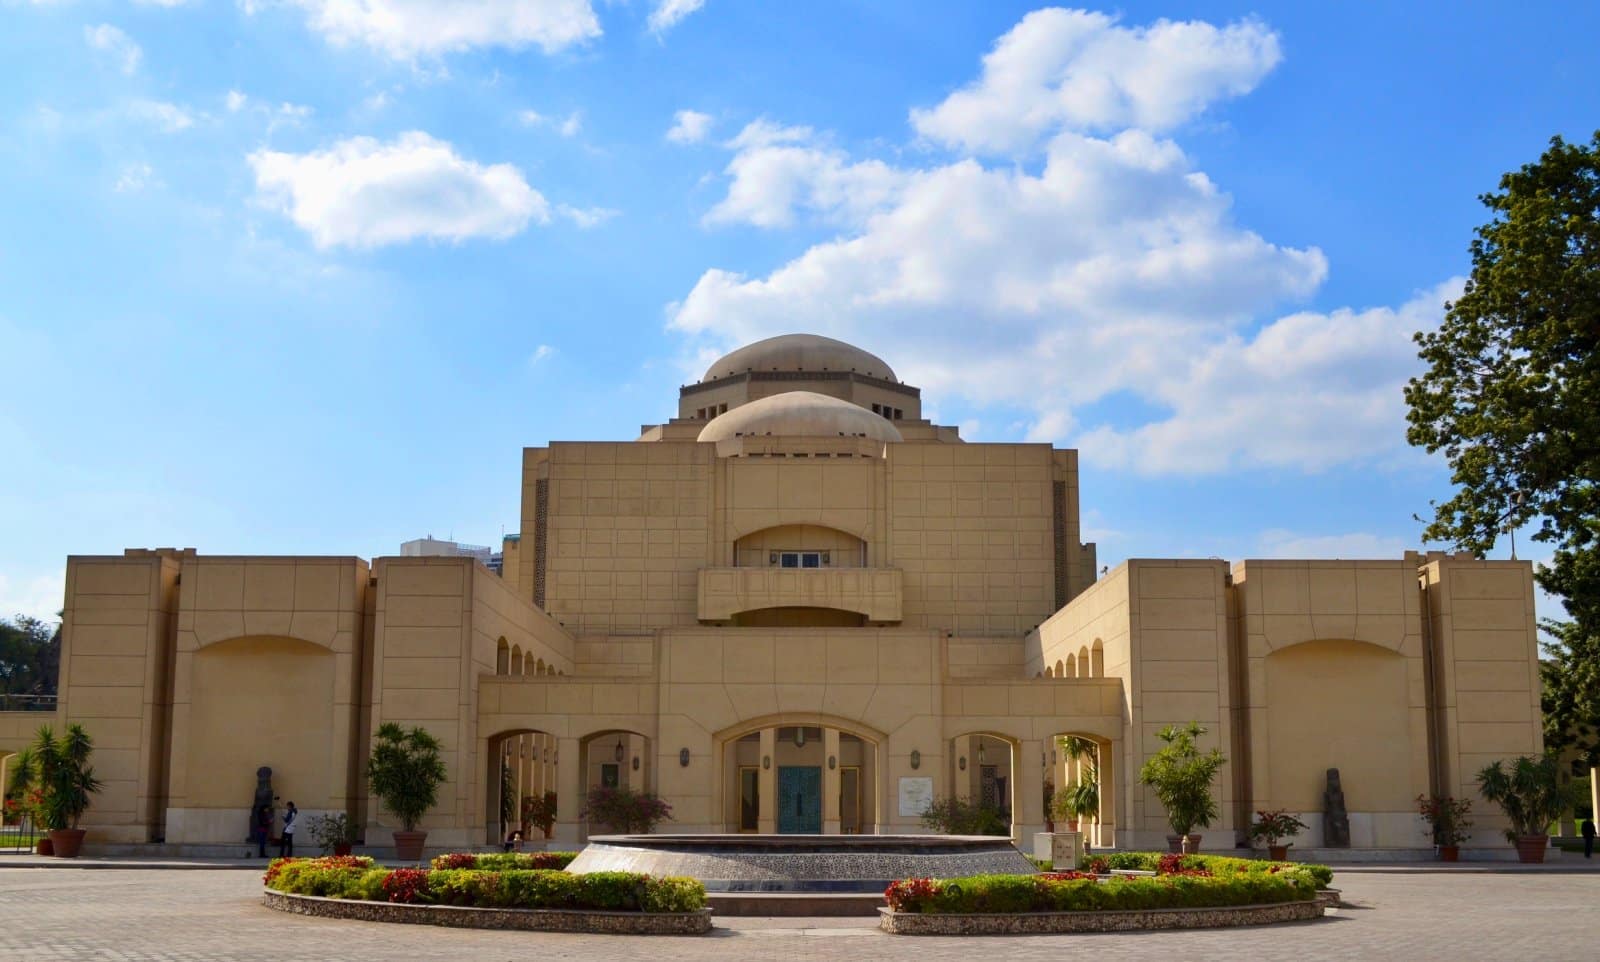 <p class="wp-caption-text">Image Credit: Shutterstock / Youssef Zakaria</p>  <p><span>The Cairo Opera House, situated within the National Cultural Center in the Zamalek district, is Egypt’s premier performing arts venue. It stands as a symbol of cultural renaissance, offering a diverse program of opera, ballet, symphonies, and modern theatre. The Opera House is not just a venue for performances but a cultural institution aiming to promote the arts and foster cultural exchange. Its modern architecture, spacious halls and state-of-the-art acoustics, makes it a focal point for cultural life in Cairo. Attending a performance here offers a glimpse into Egypt’s vibrant contemporary arts scene.</span></p>